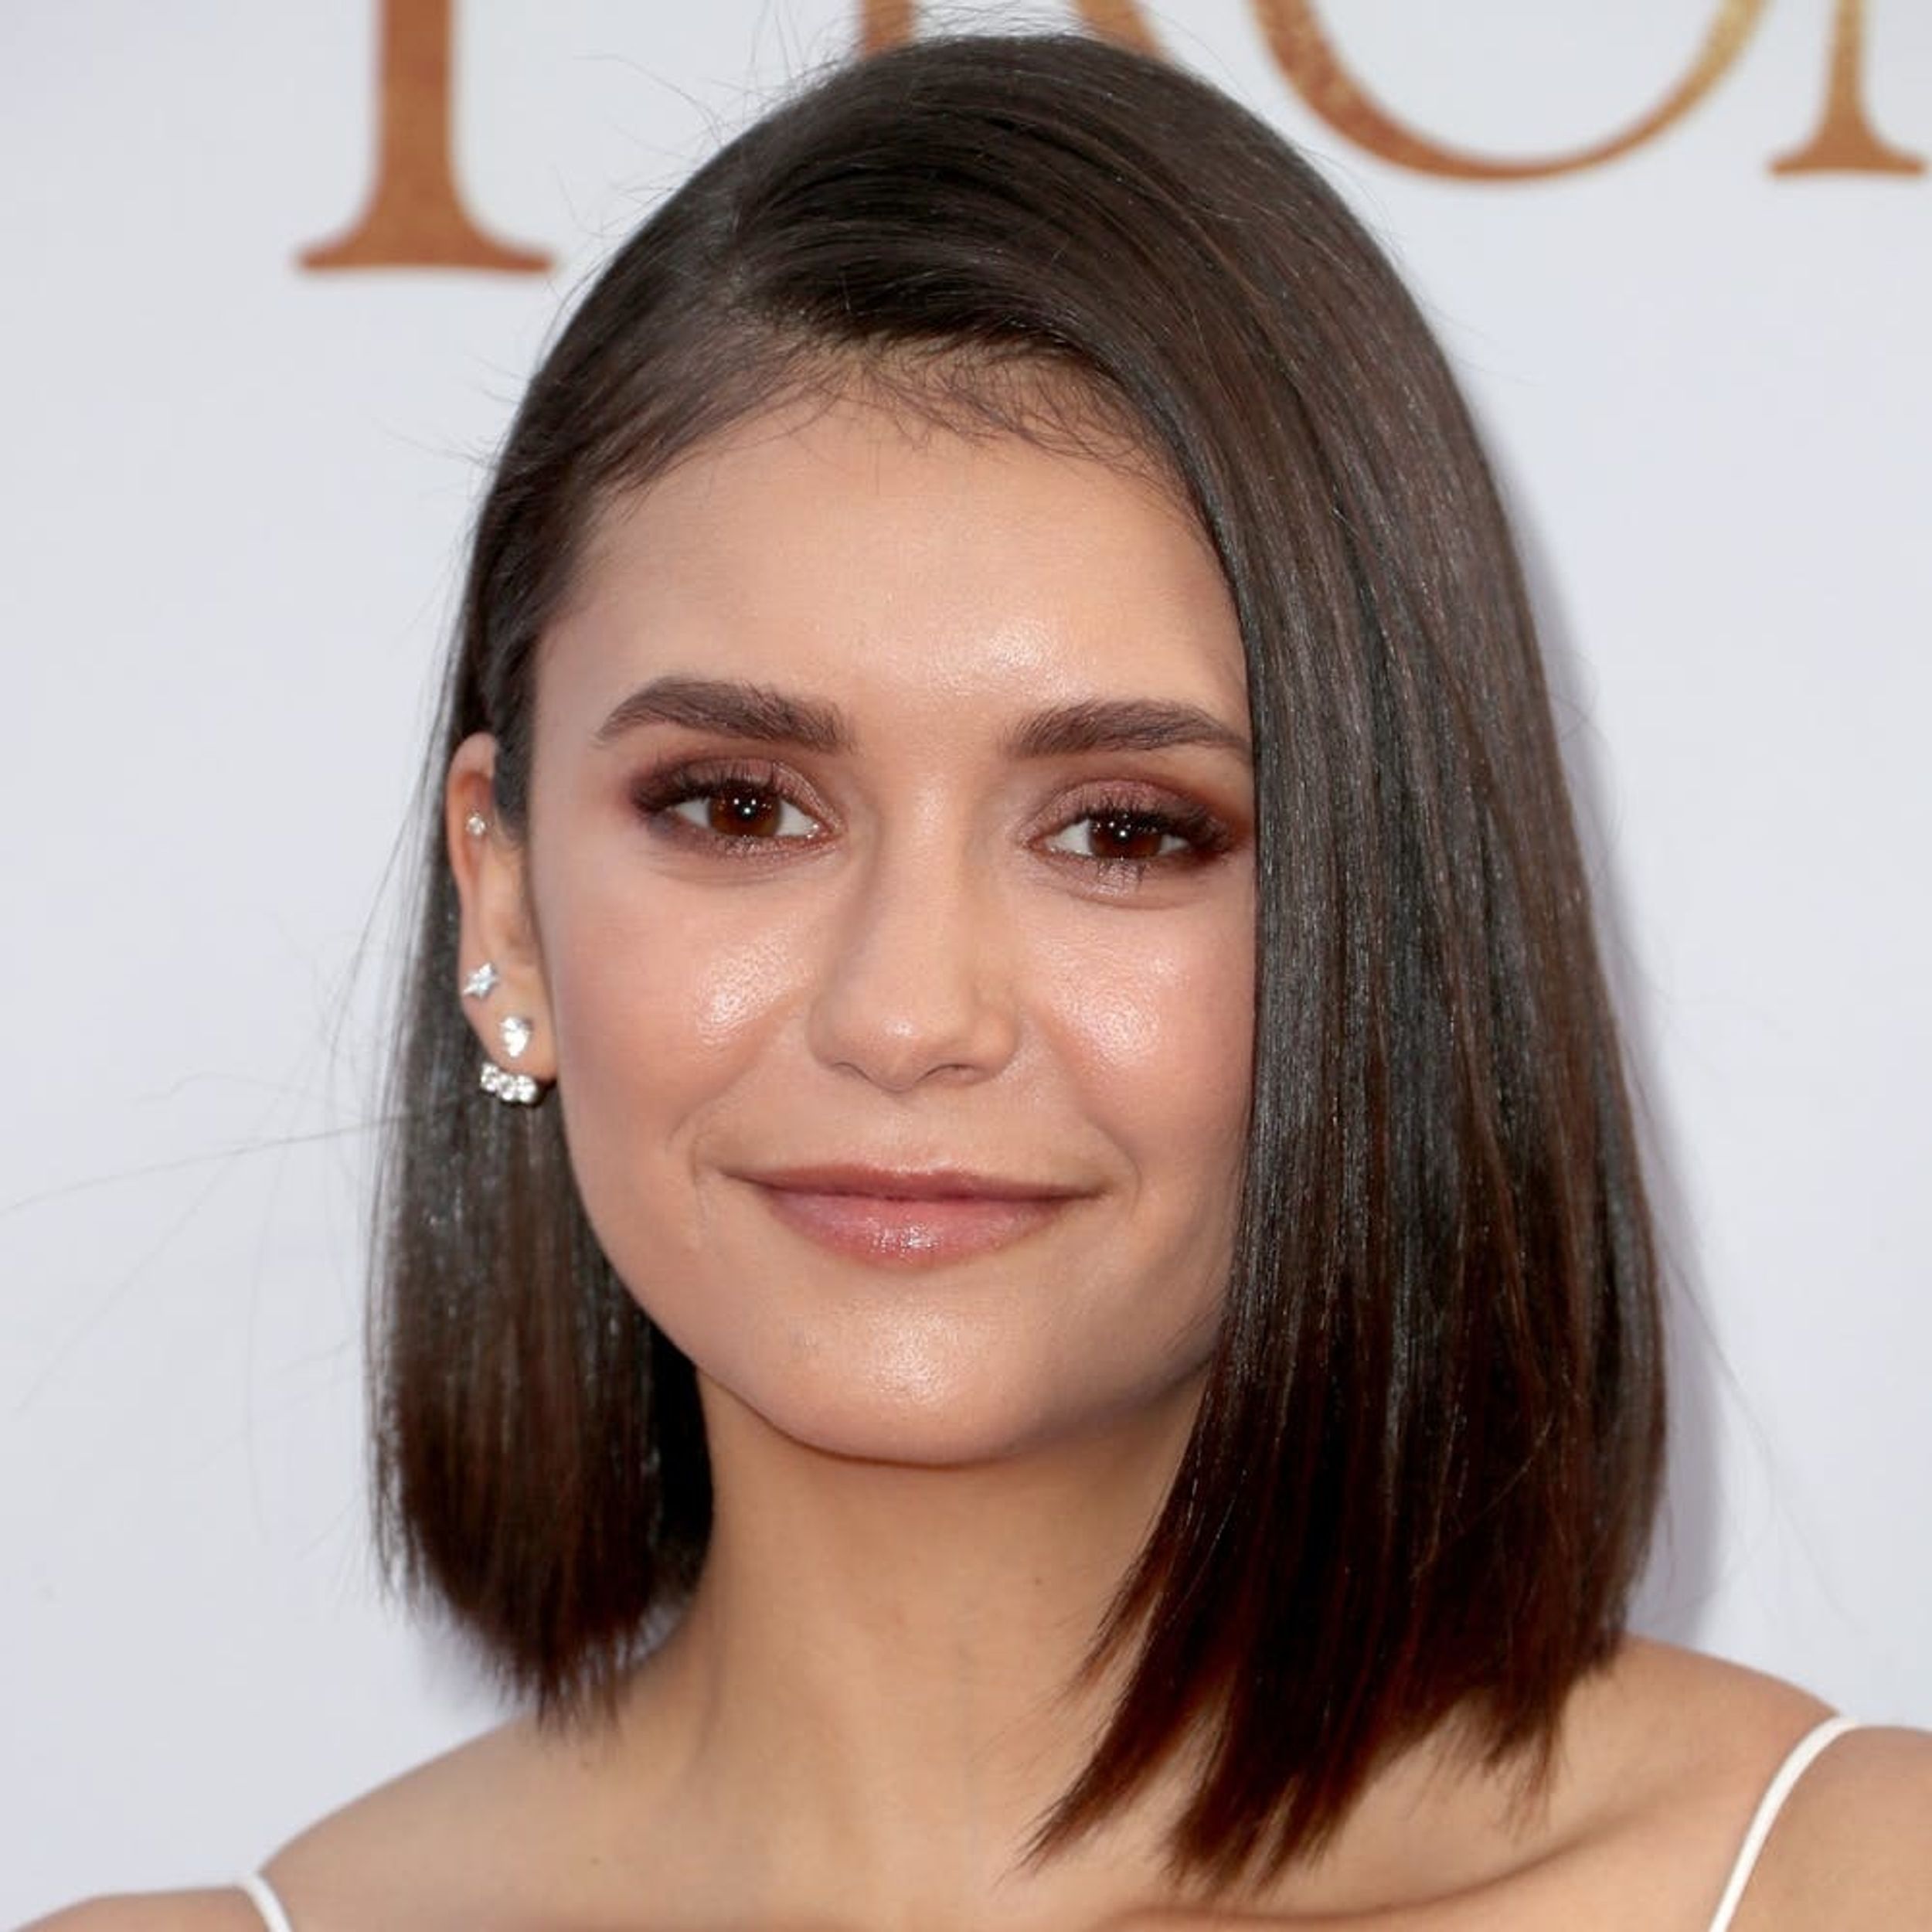 Nina Dobrev Calls This Drugstore Beauty Product “Unicorn Poop in a Bottle”